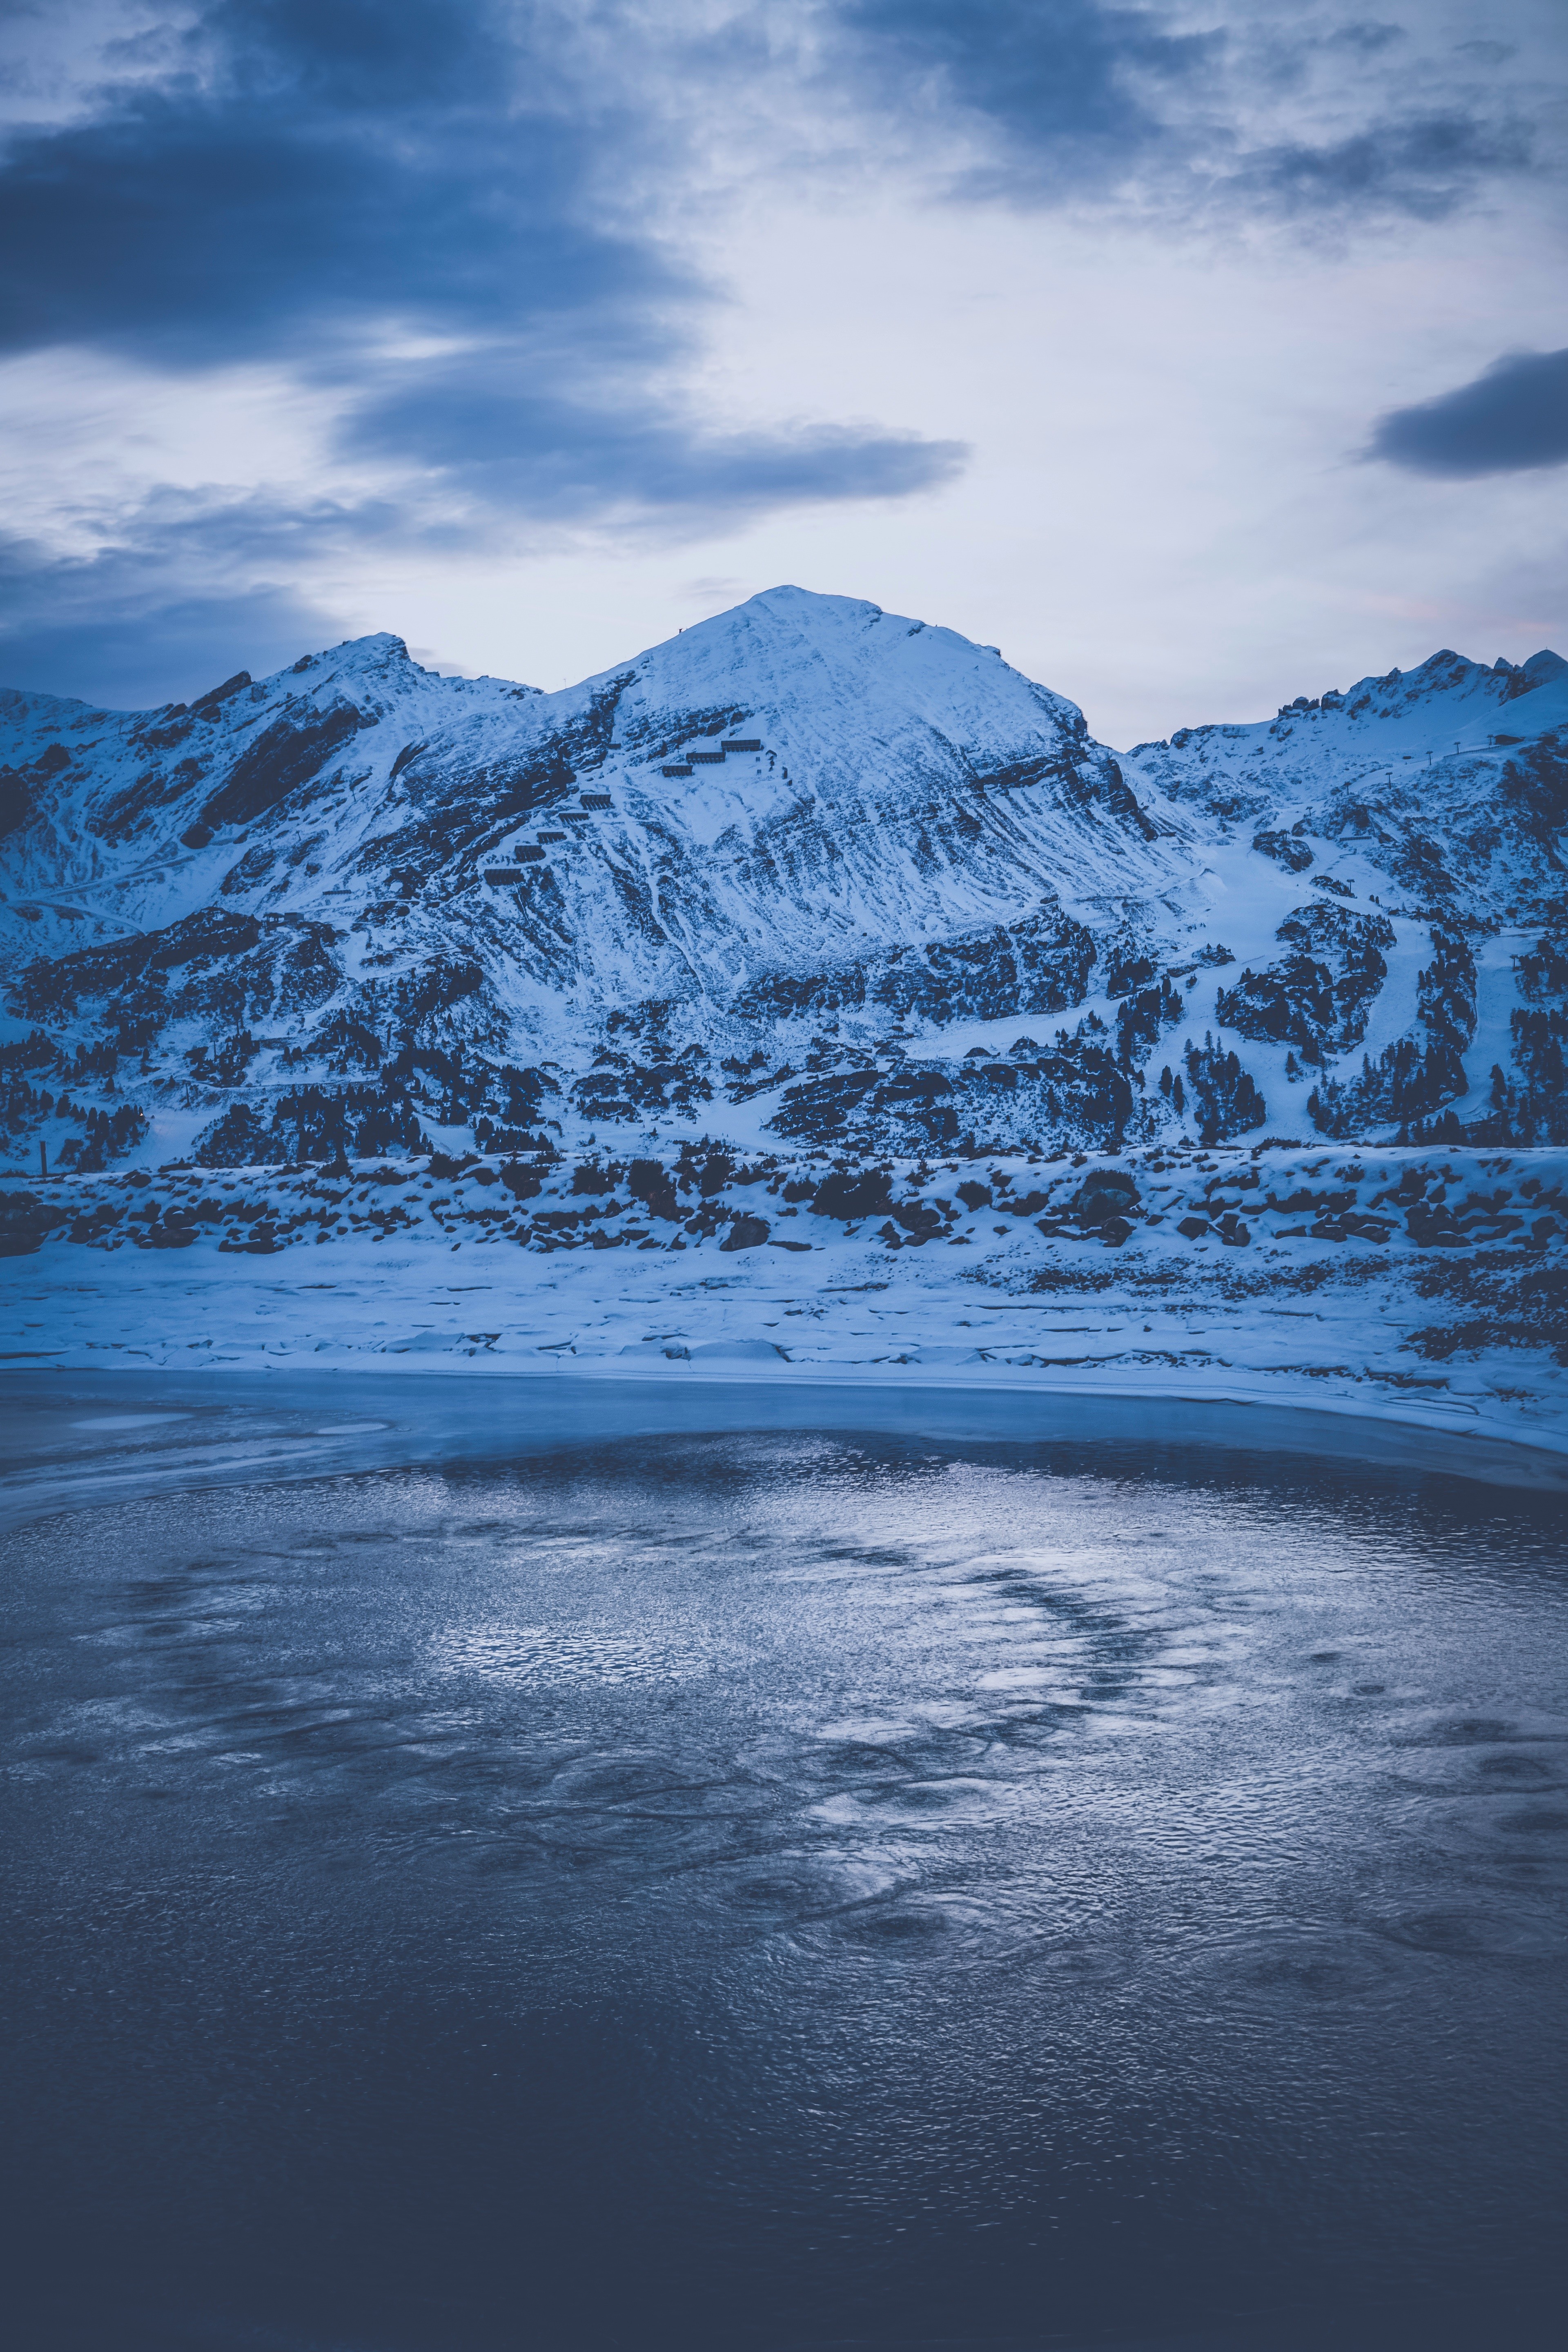 General 3840x5760 nature snow water winter mountains ice cold snowy peak landscape